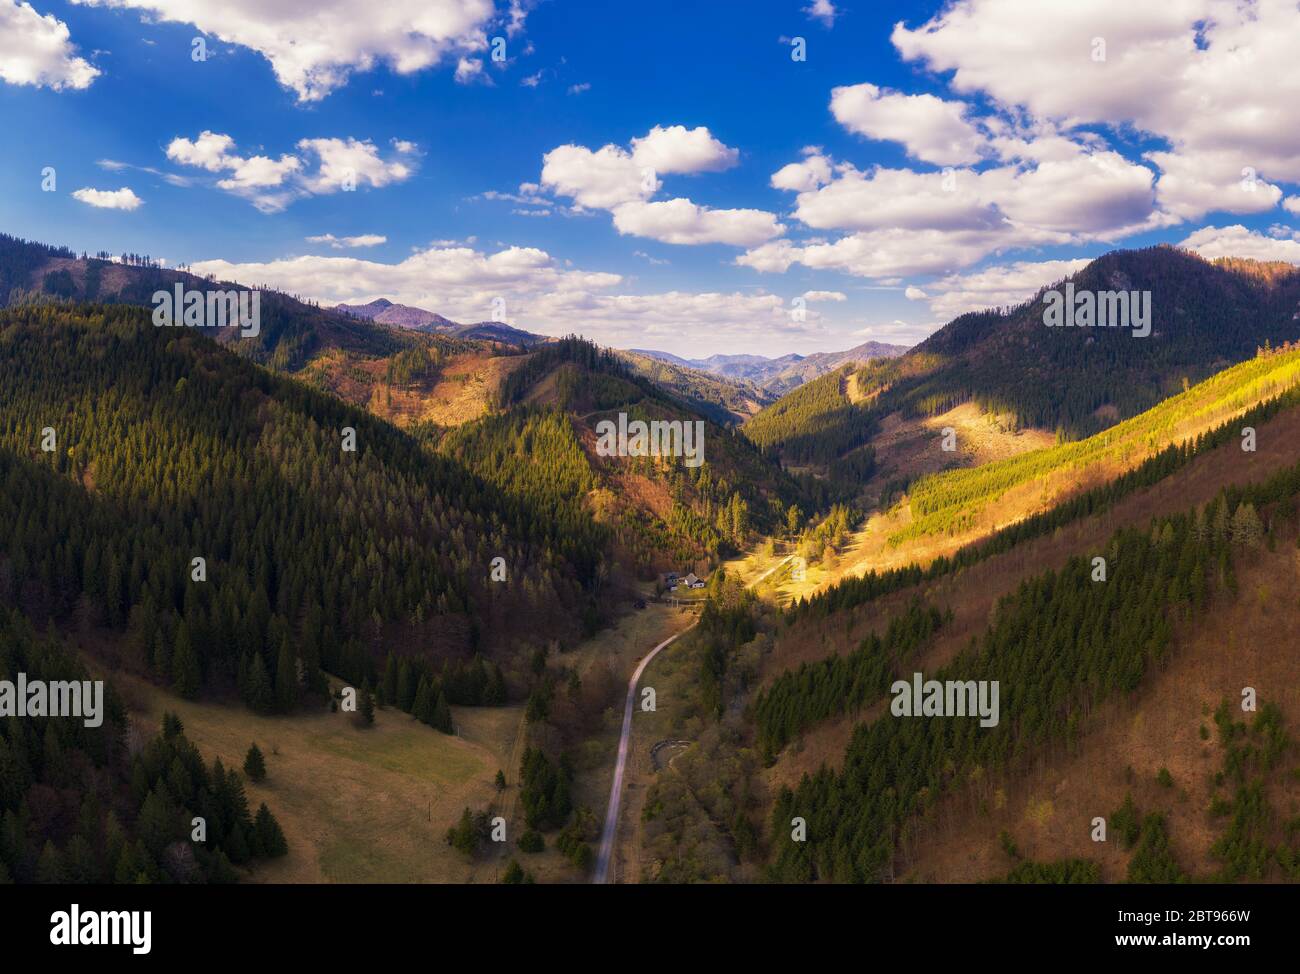 Aerial view of a valley in the Greater Fatra mountains in Slovakia Stock Photo